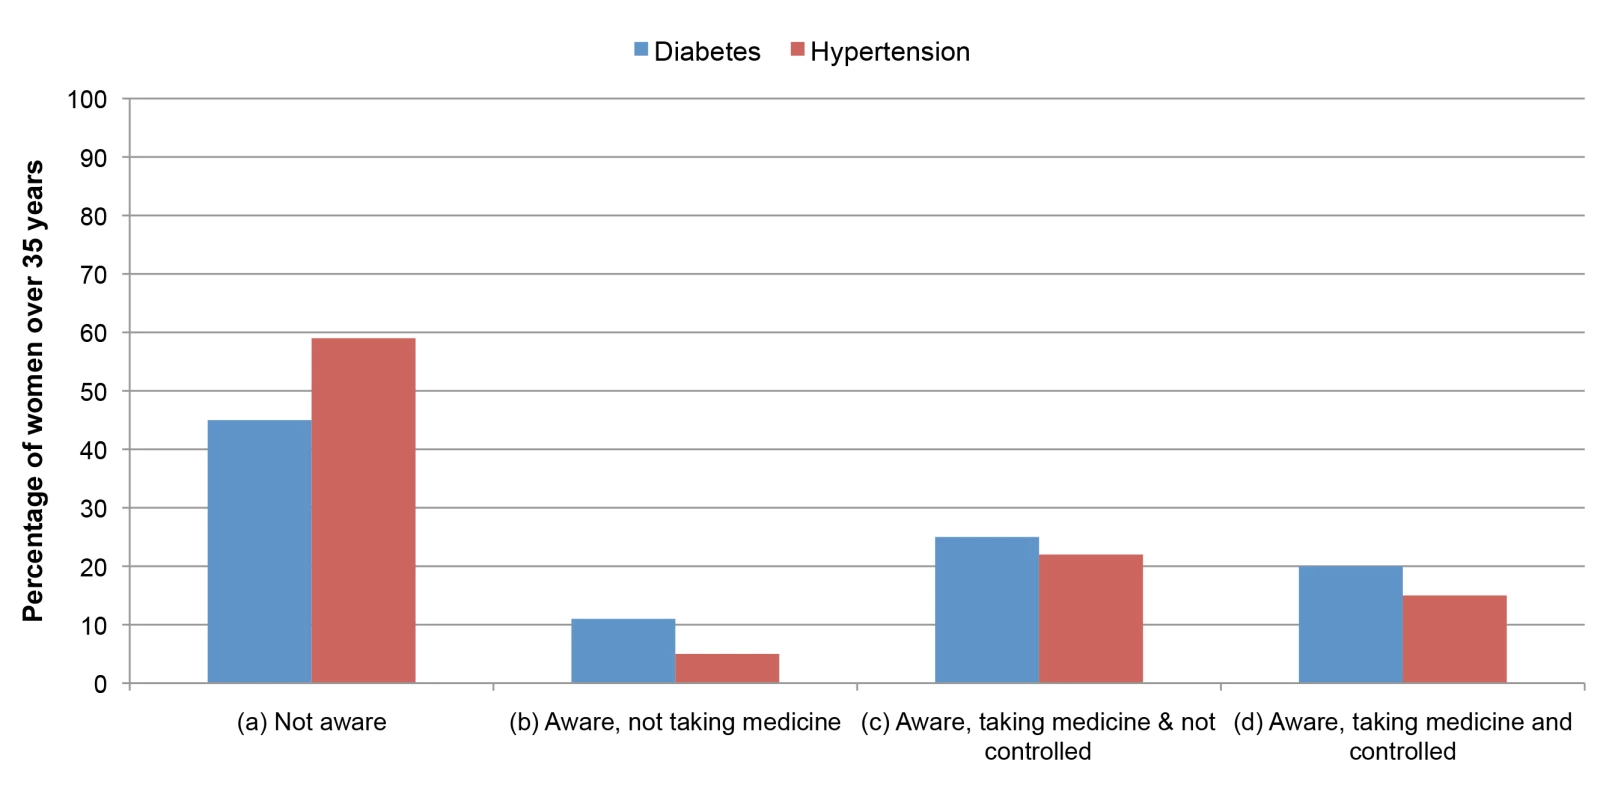 Hypertension and diabetes awareness and treatment status in women age 35 and over.